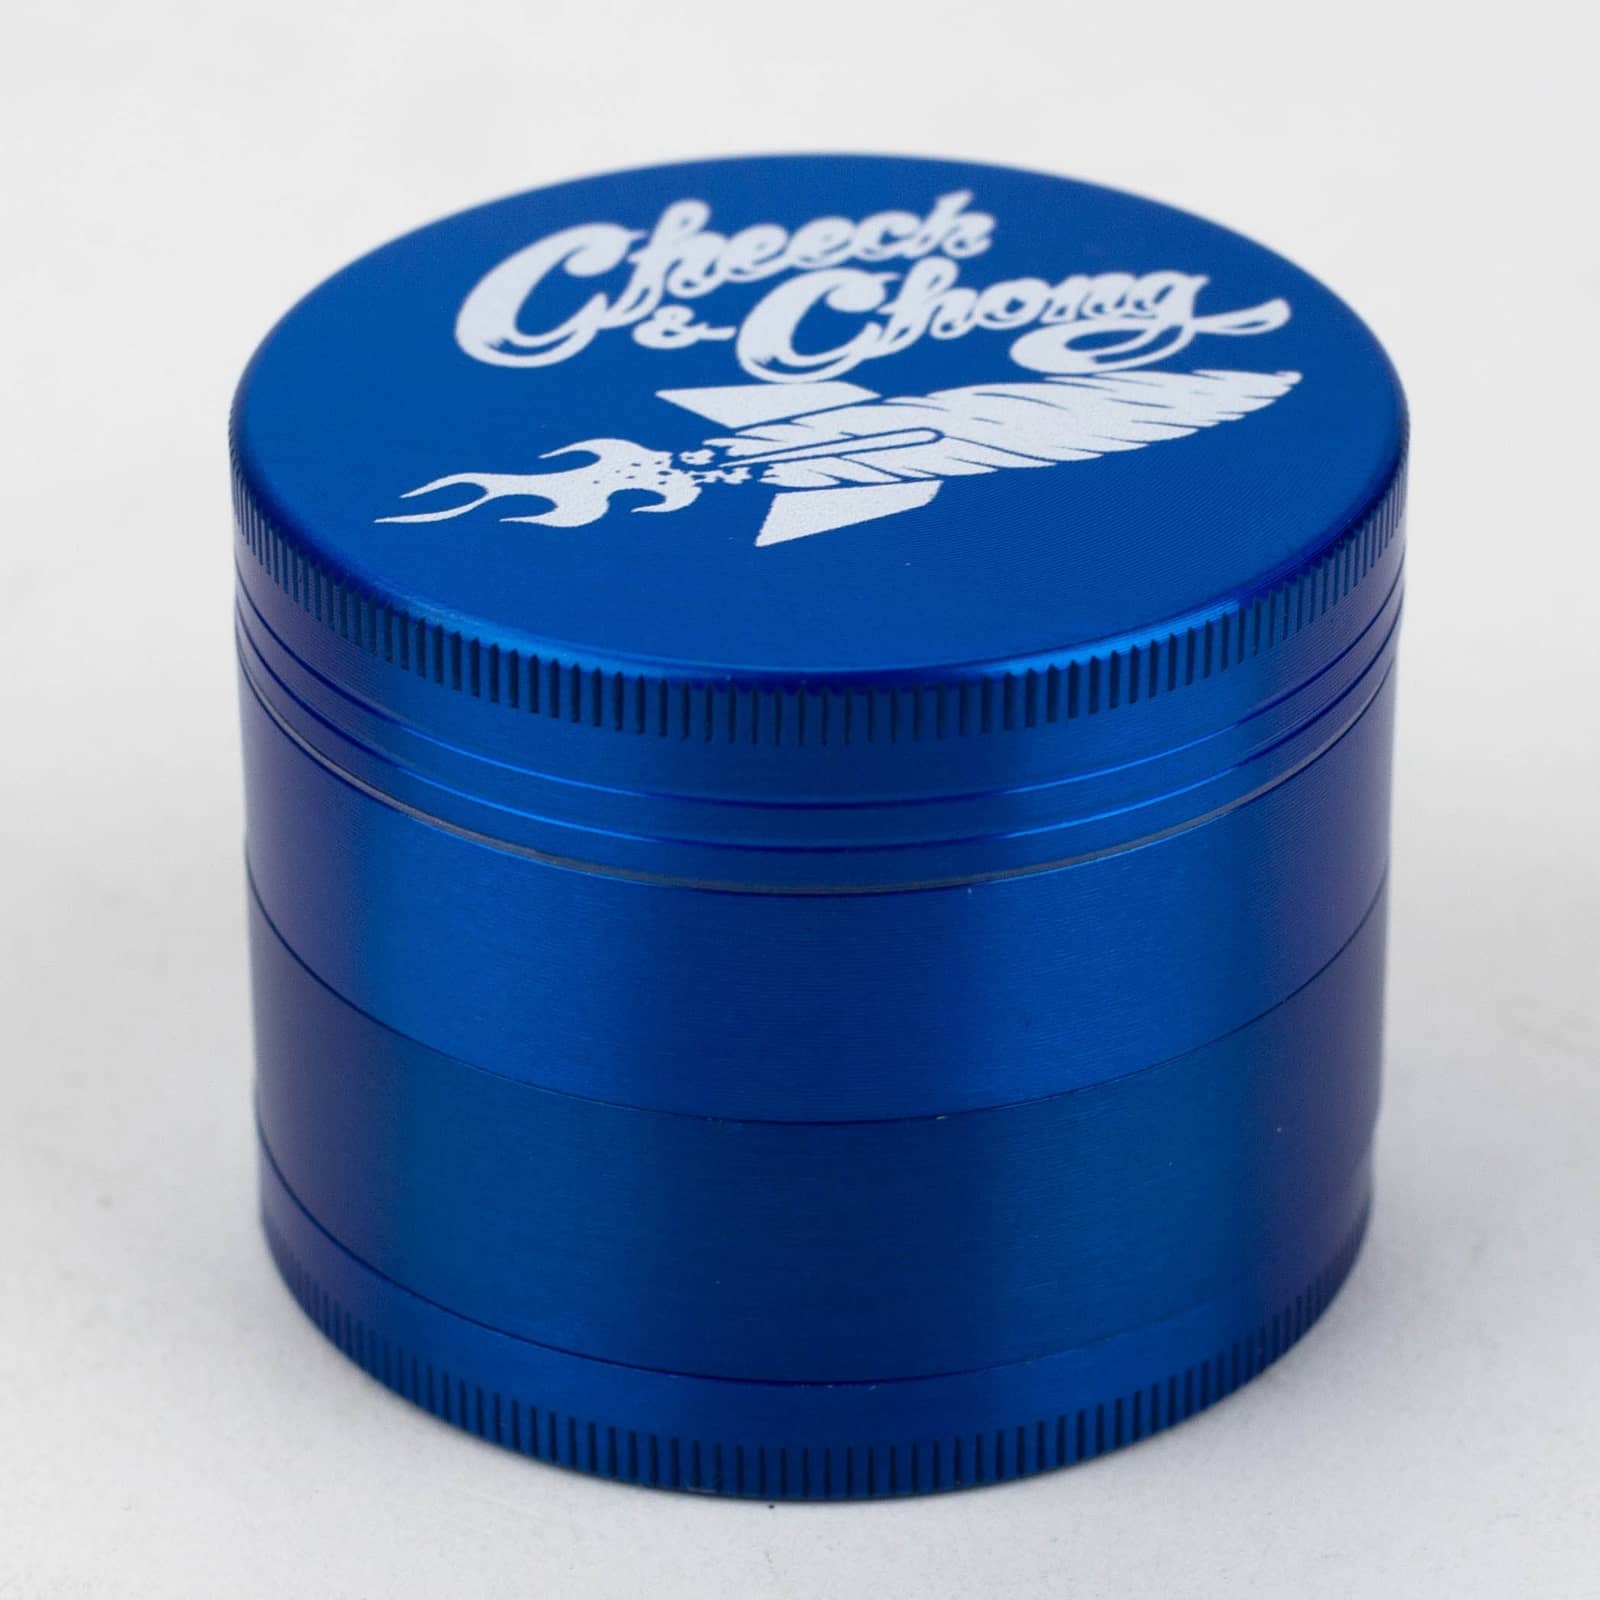 Cheech and Chong 4 Parts Metal Grinder blue up in somke